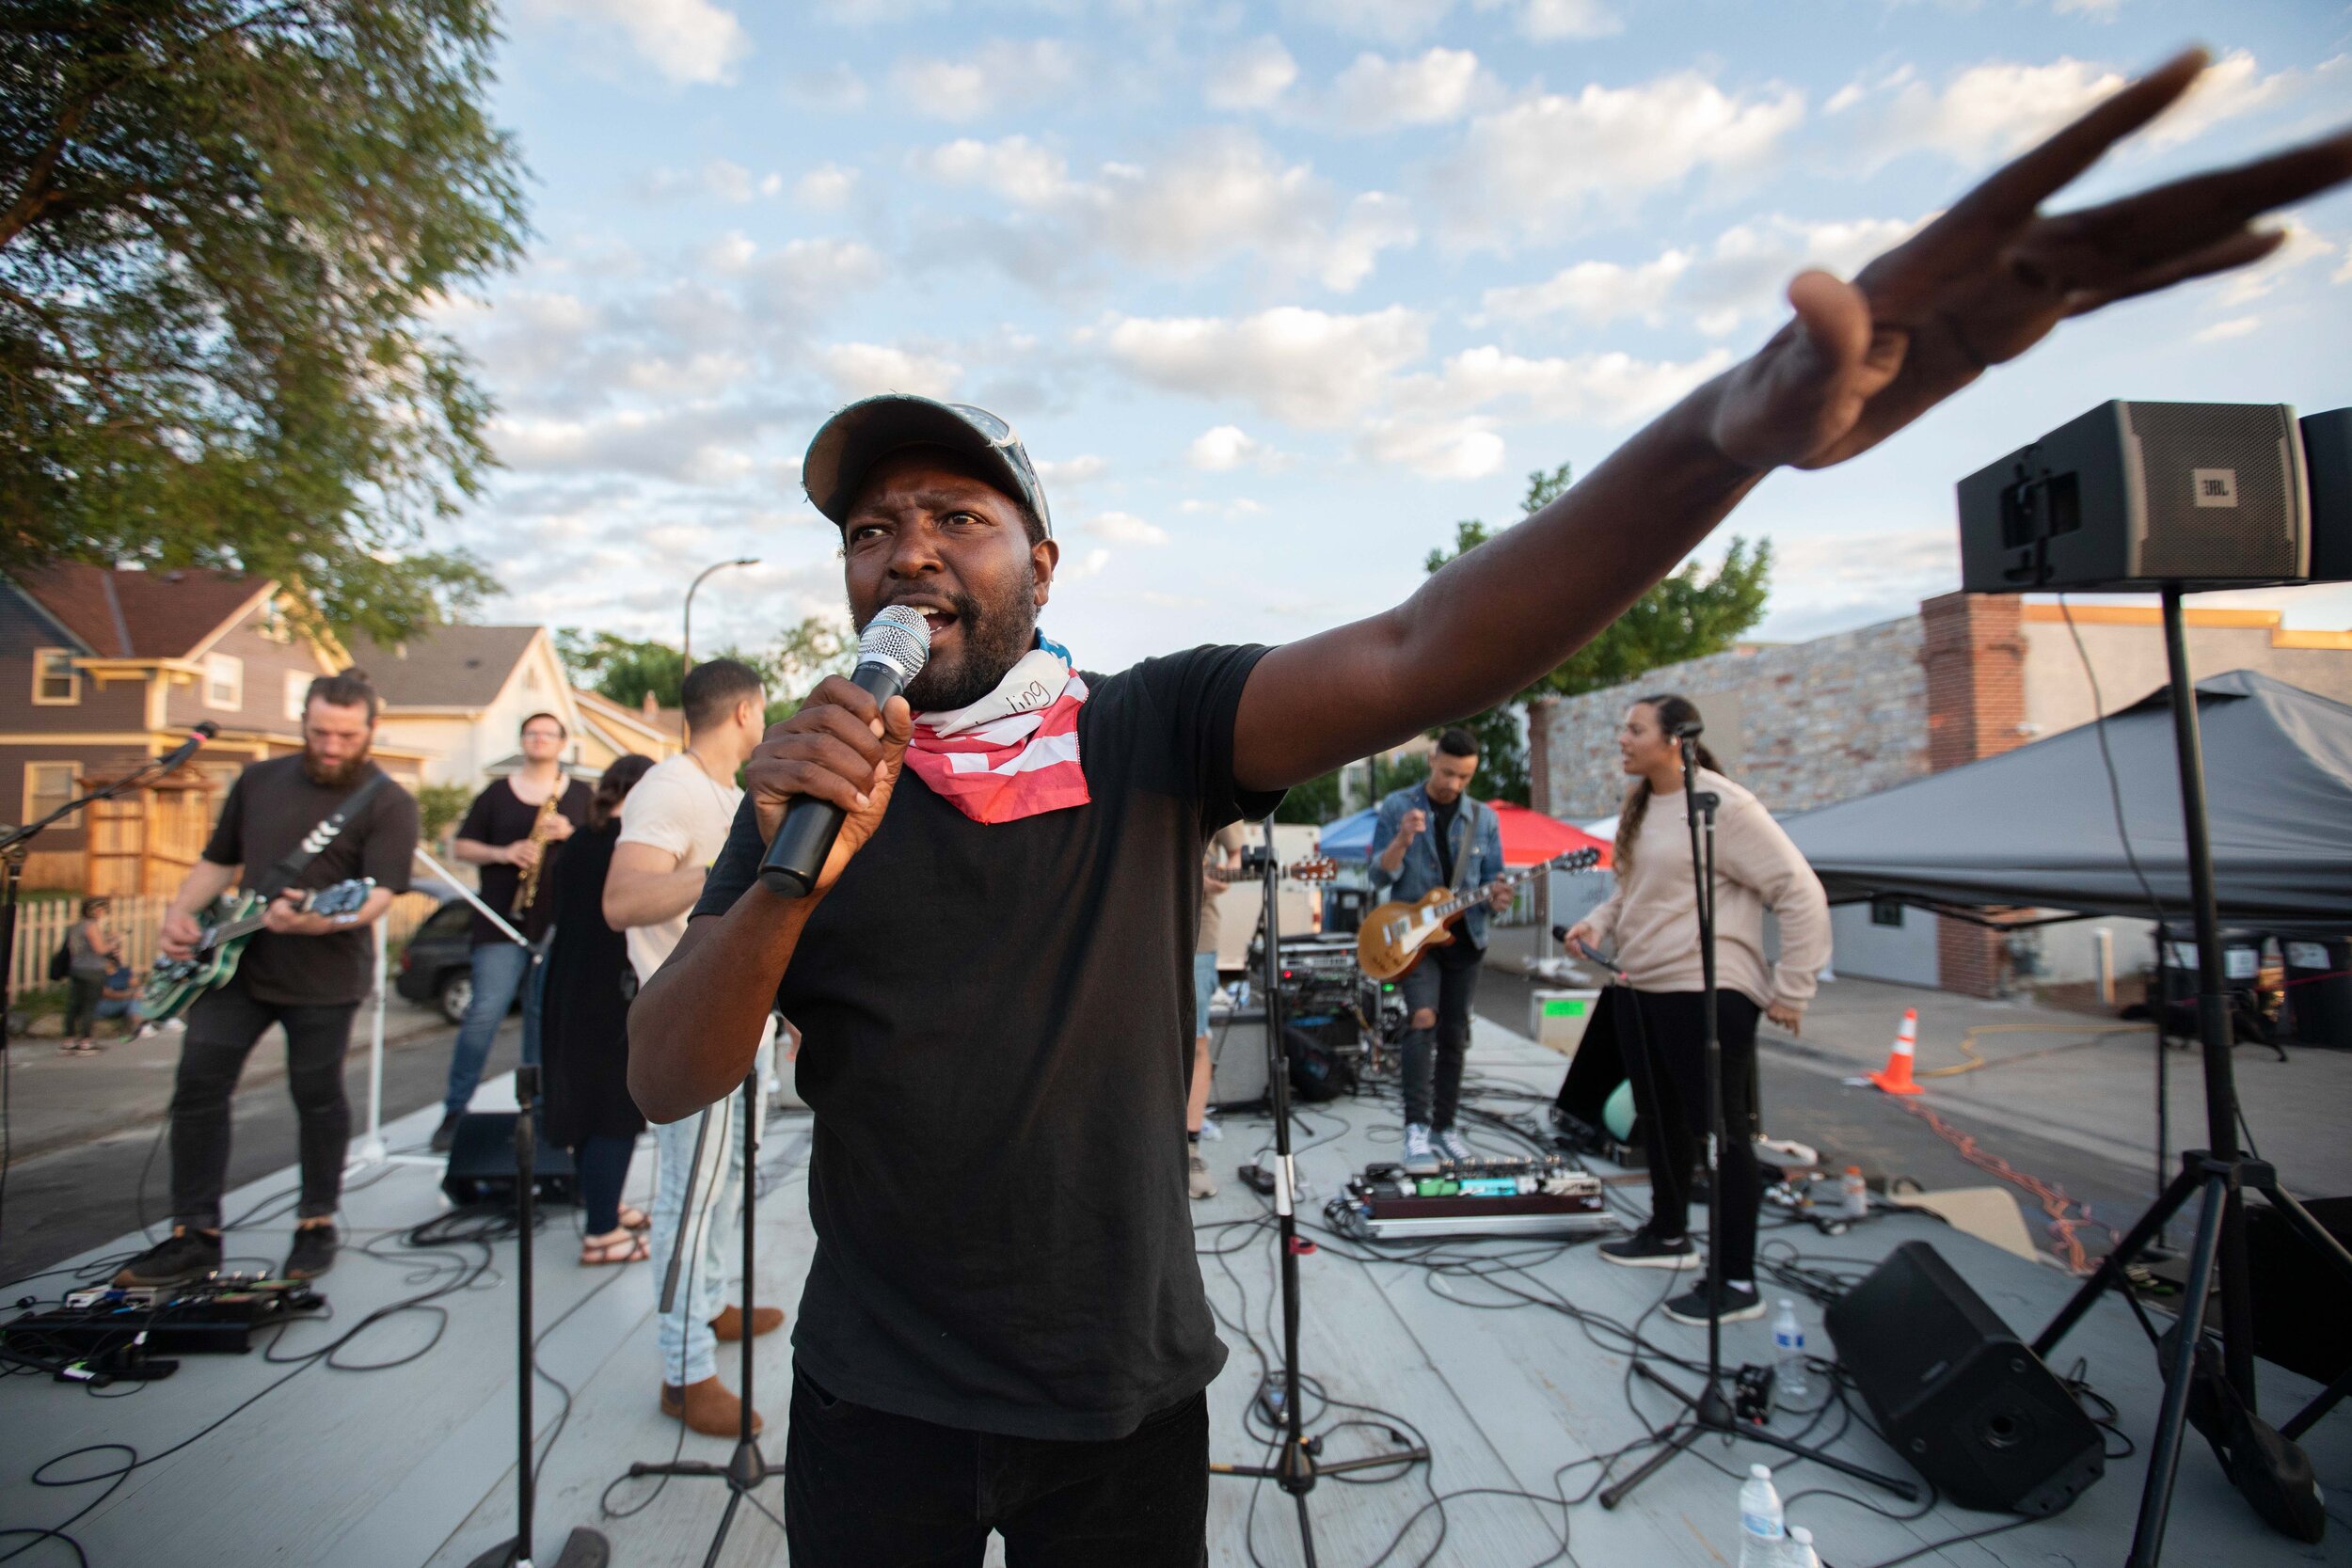  A pastor preaches to a crowd of community members at the memorial site for George Floyd in Minneapolis, Minnesota on Jun 13, 2020. 